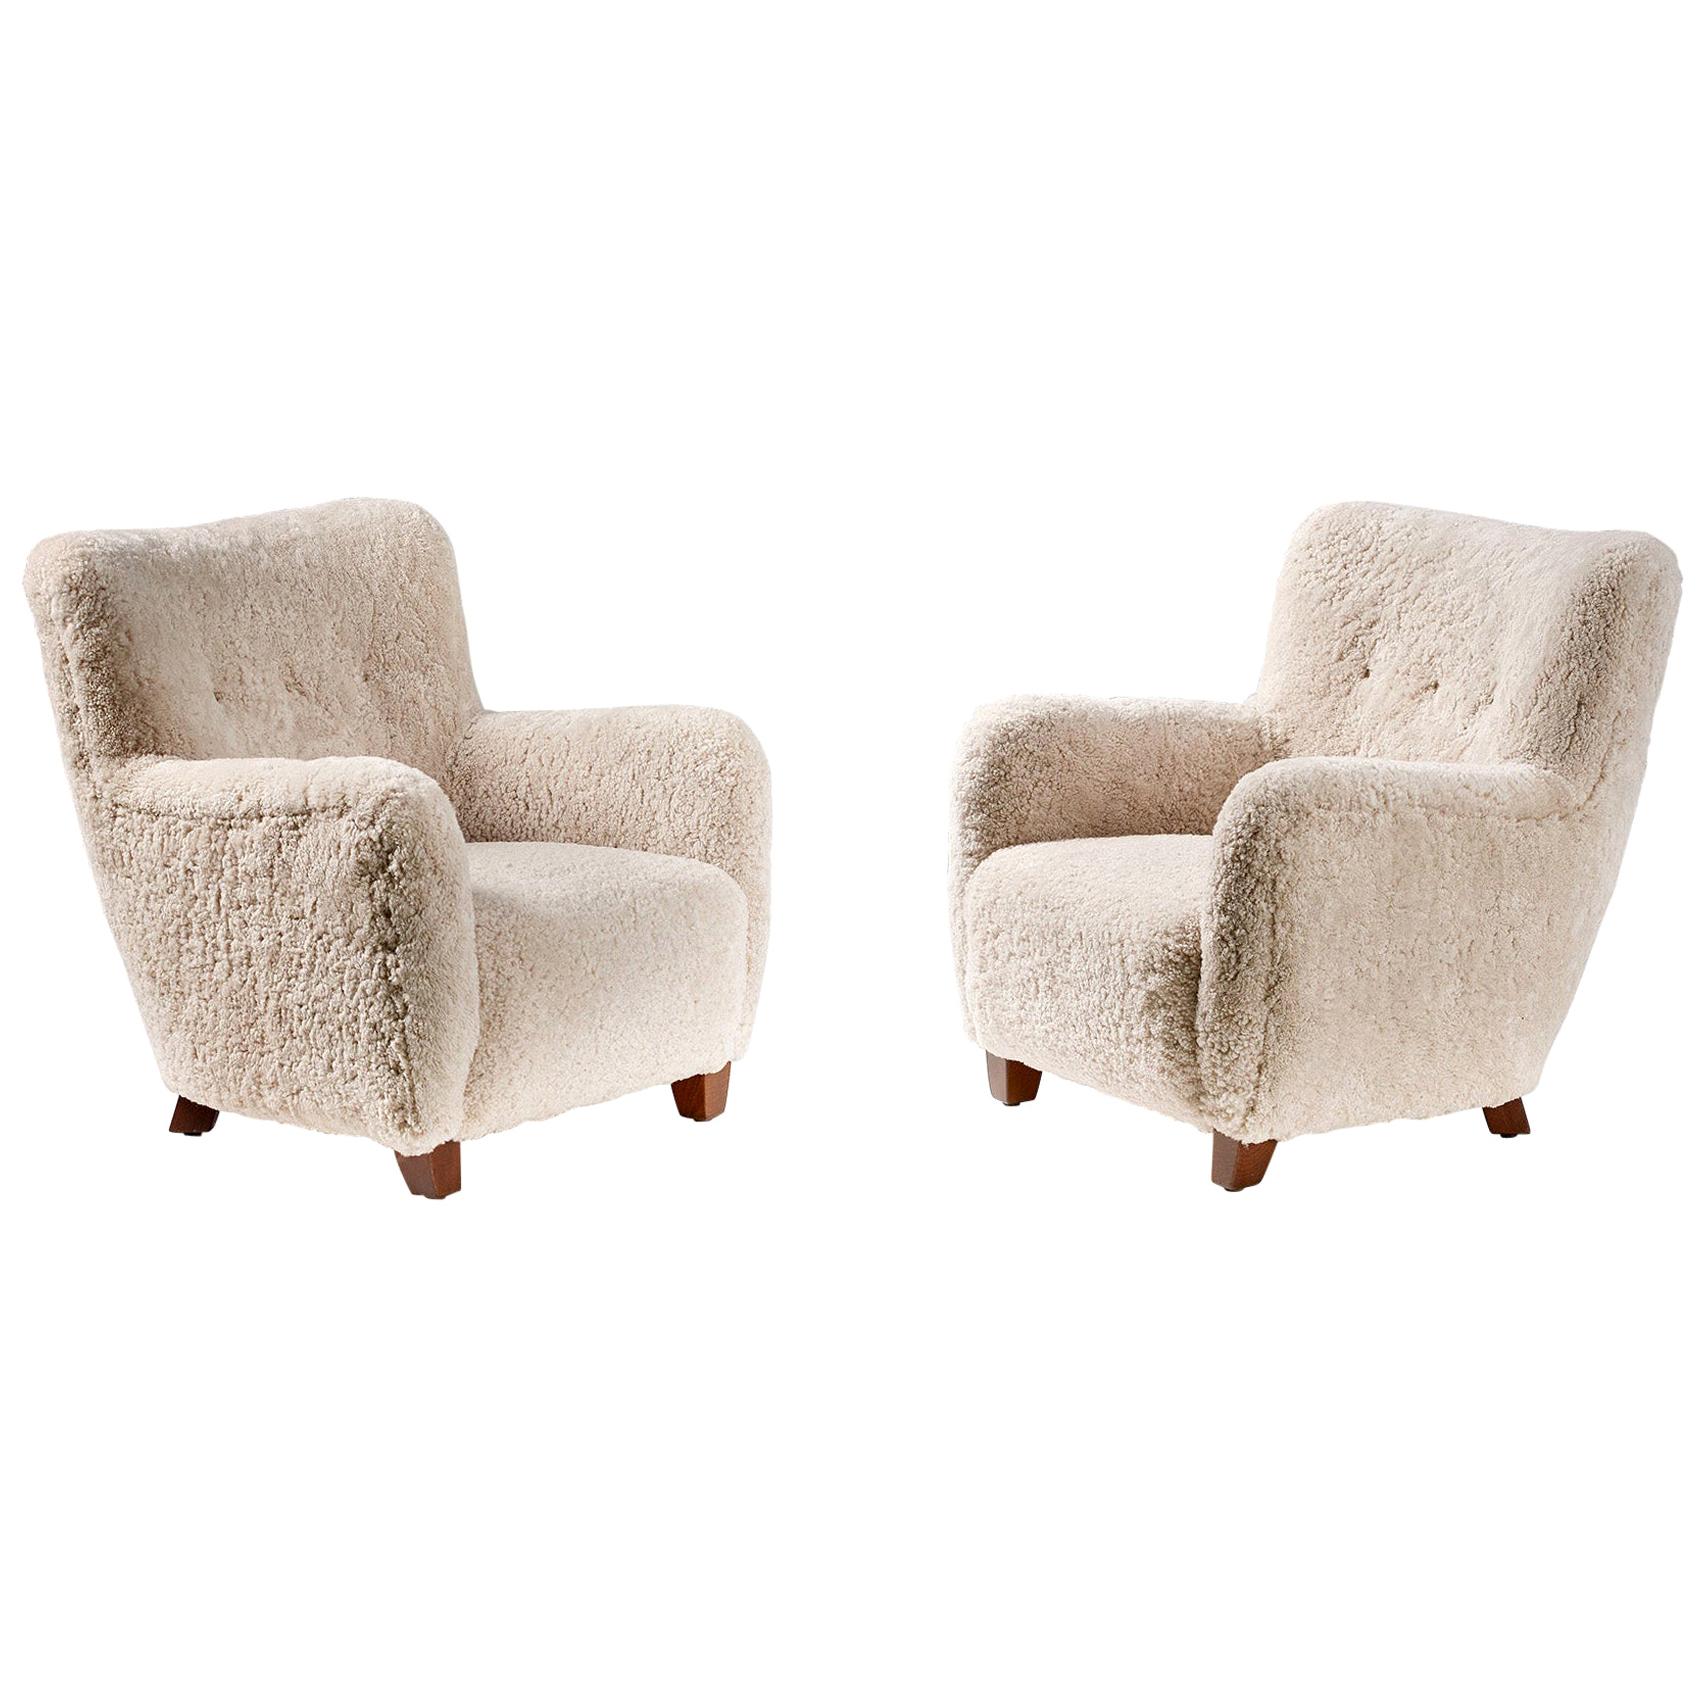 Pair of Reproduction 1950s Sheepskin Armchairs and Ottomans